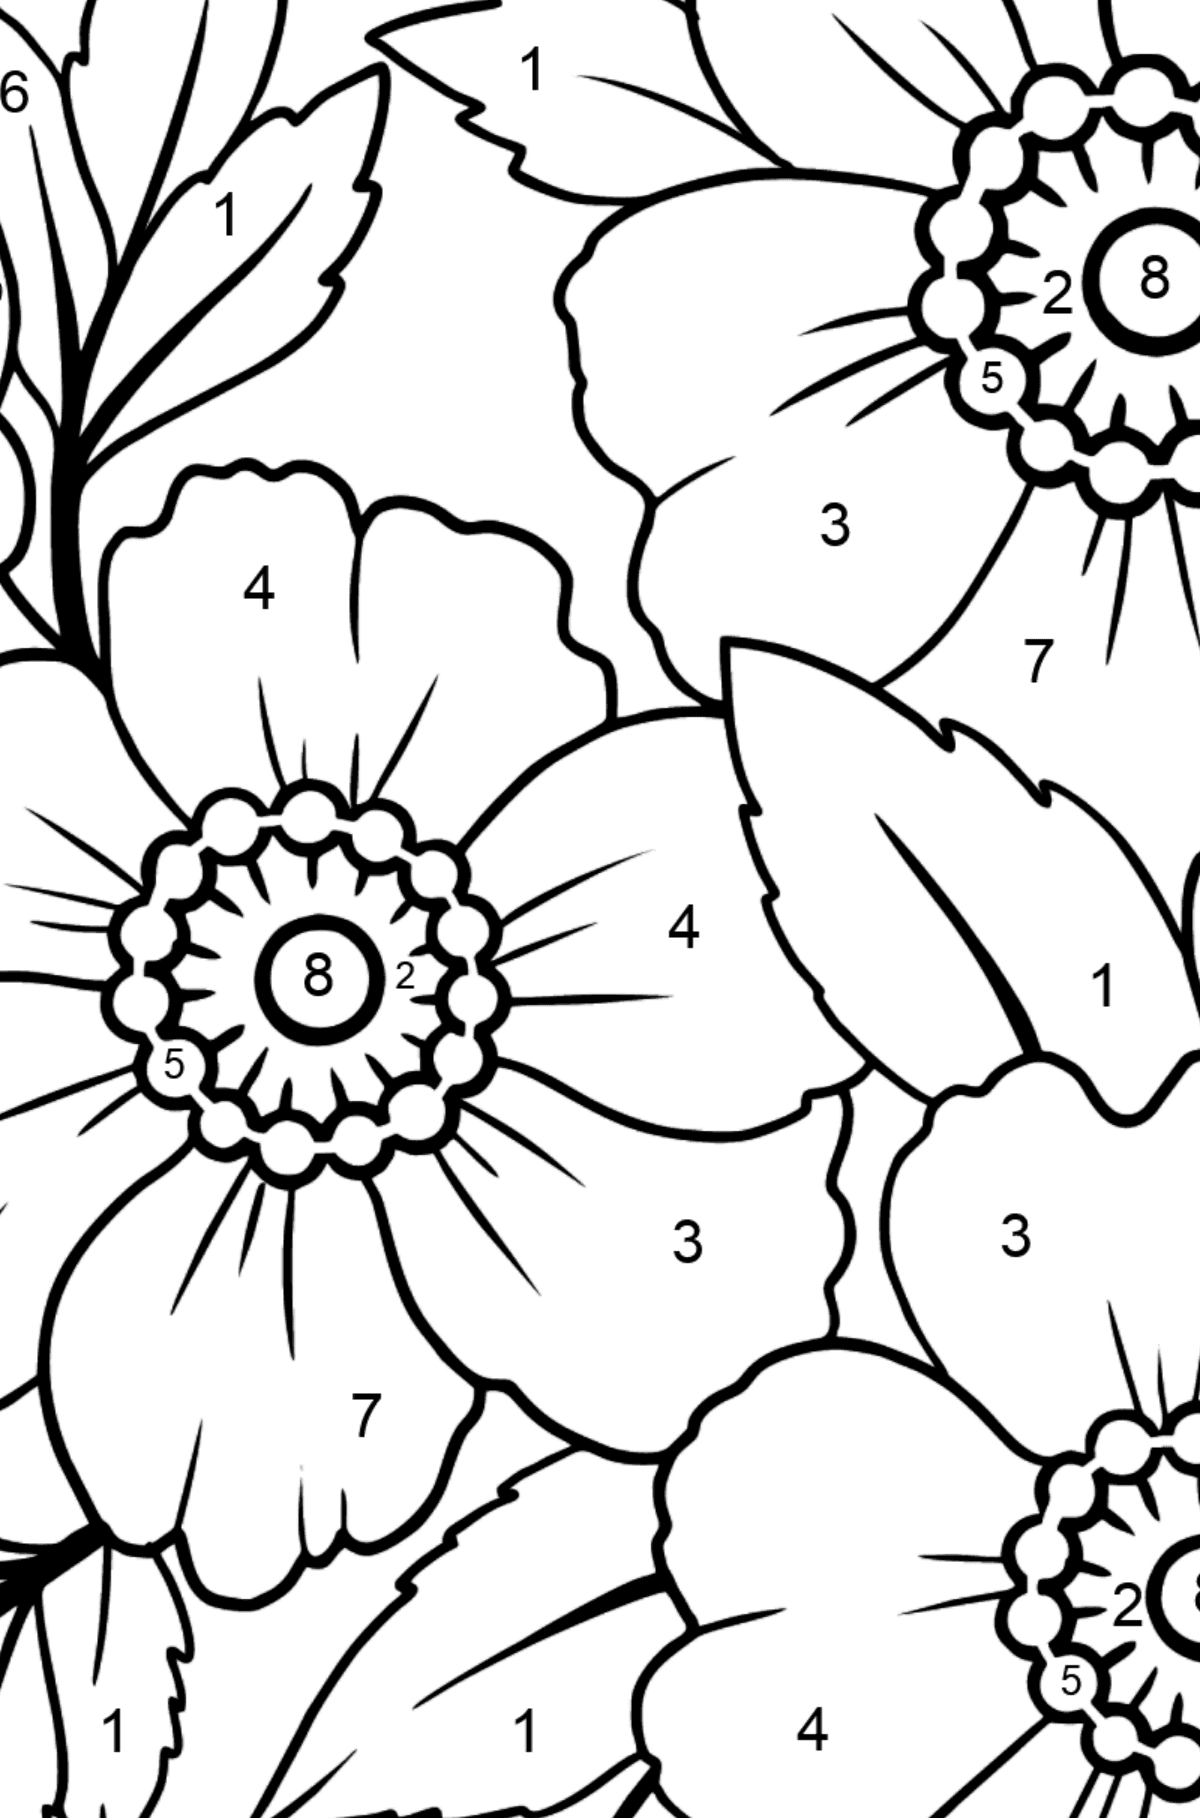 Flower Coloring Page (A4) - A Japanese Anemone with Pink Petals - Coloring by Numbers for Kids